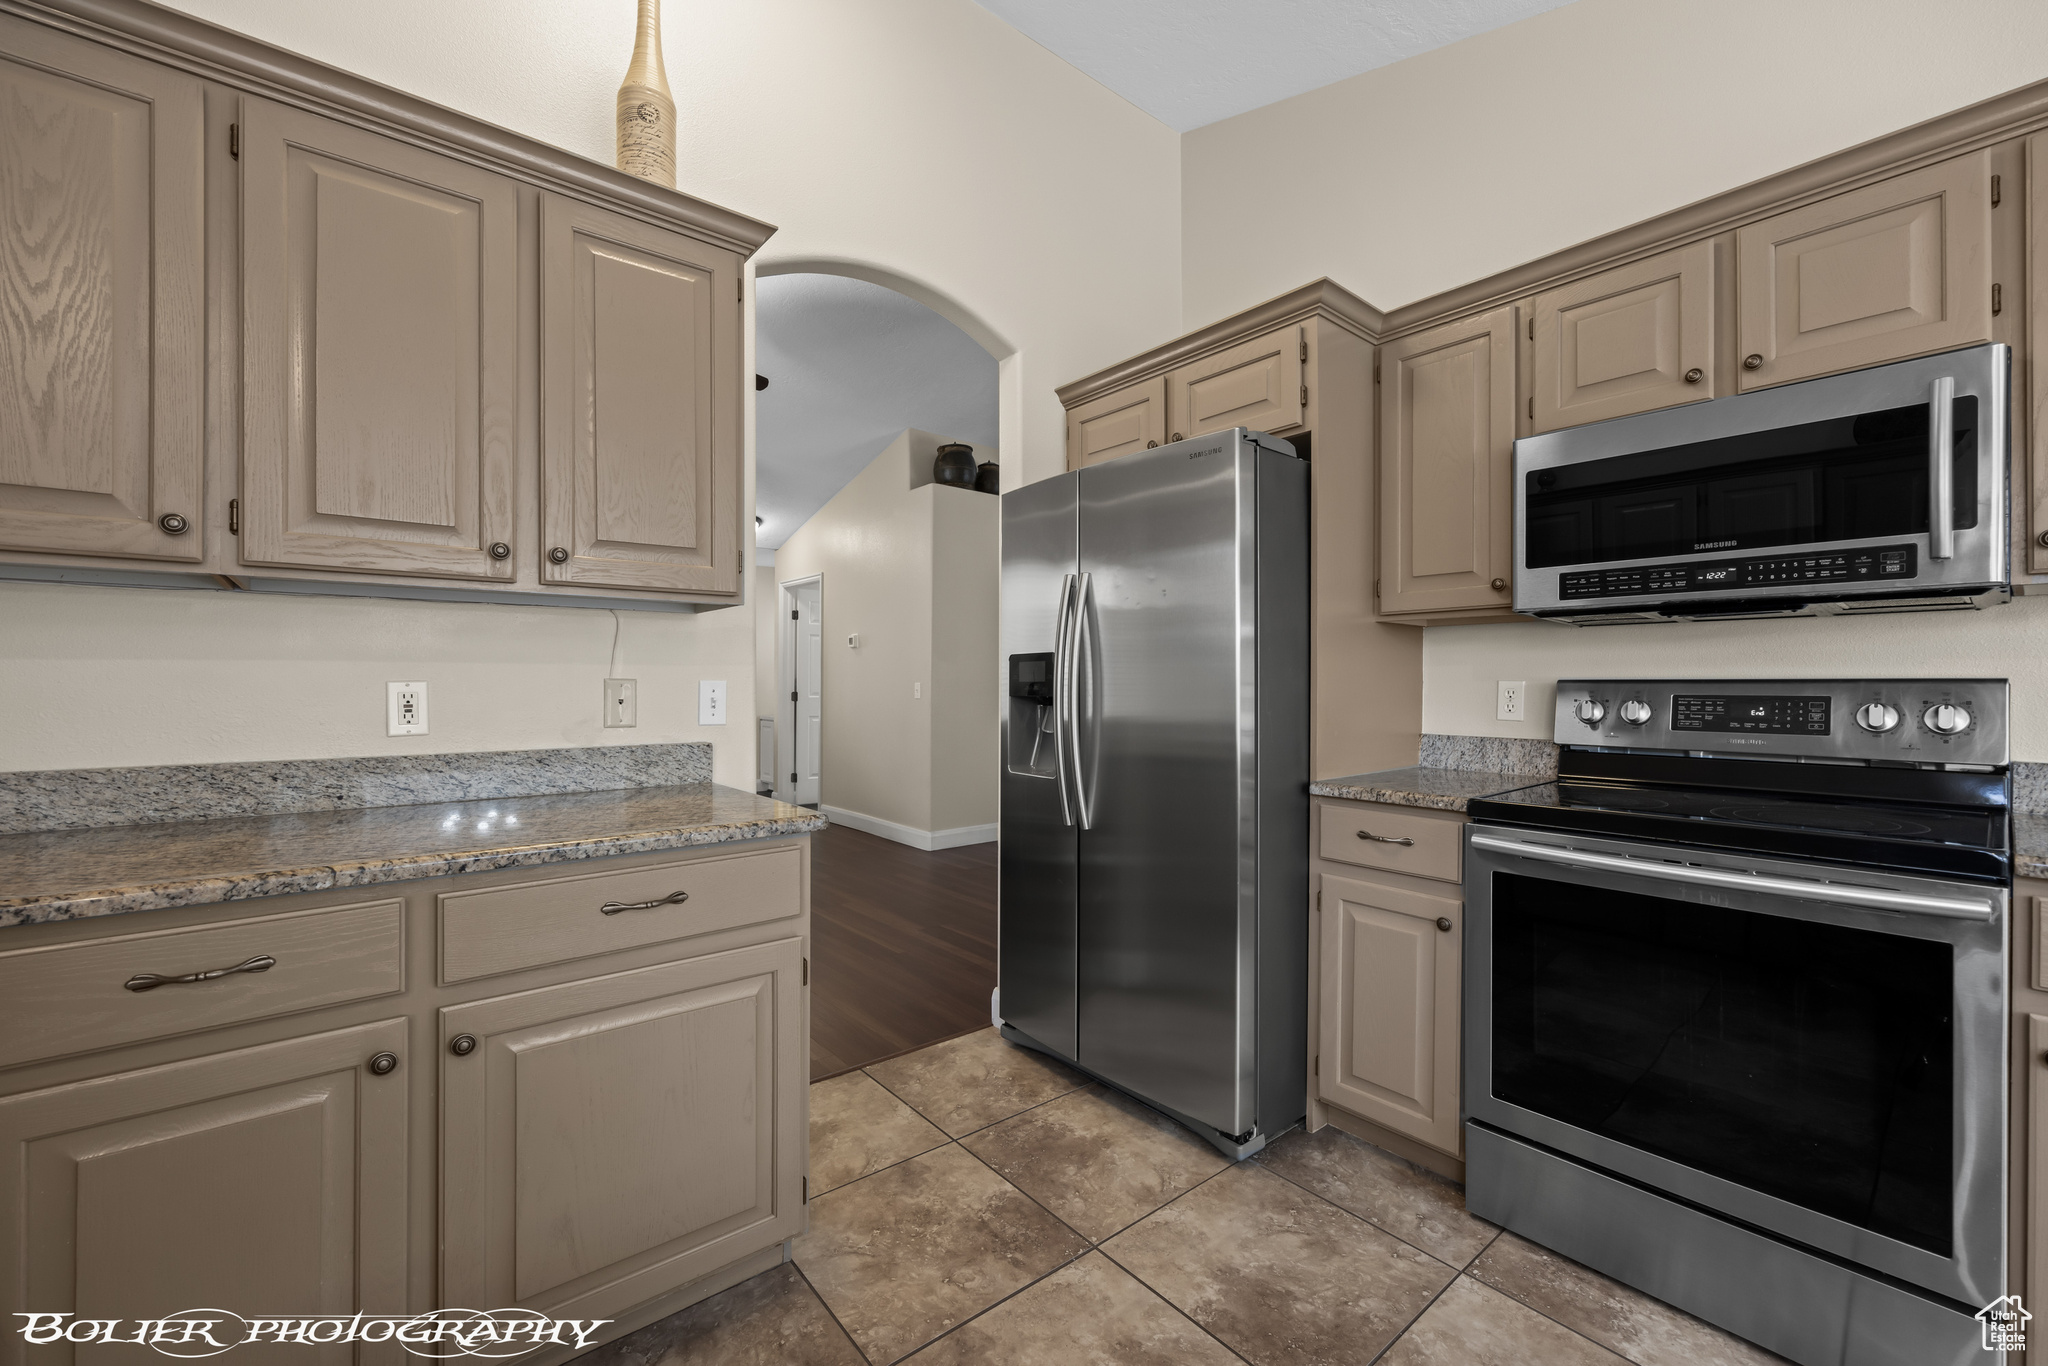 Kitchen featuring appliances with stainless steel finishes, light tile floors, and granite countertops